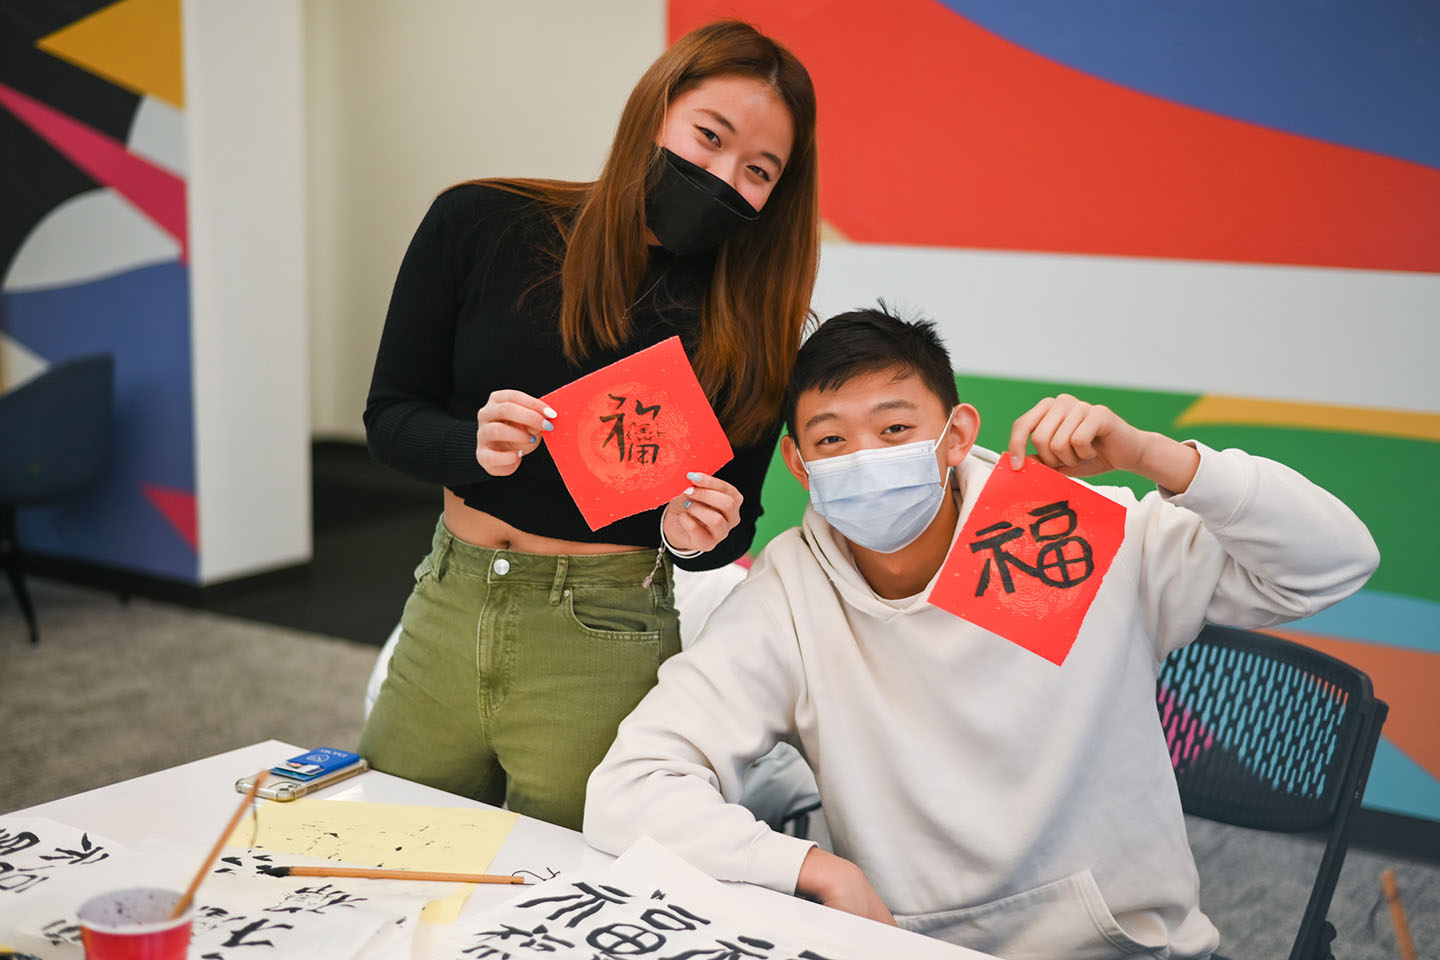 Two young people hold up their calligraphy projects